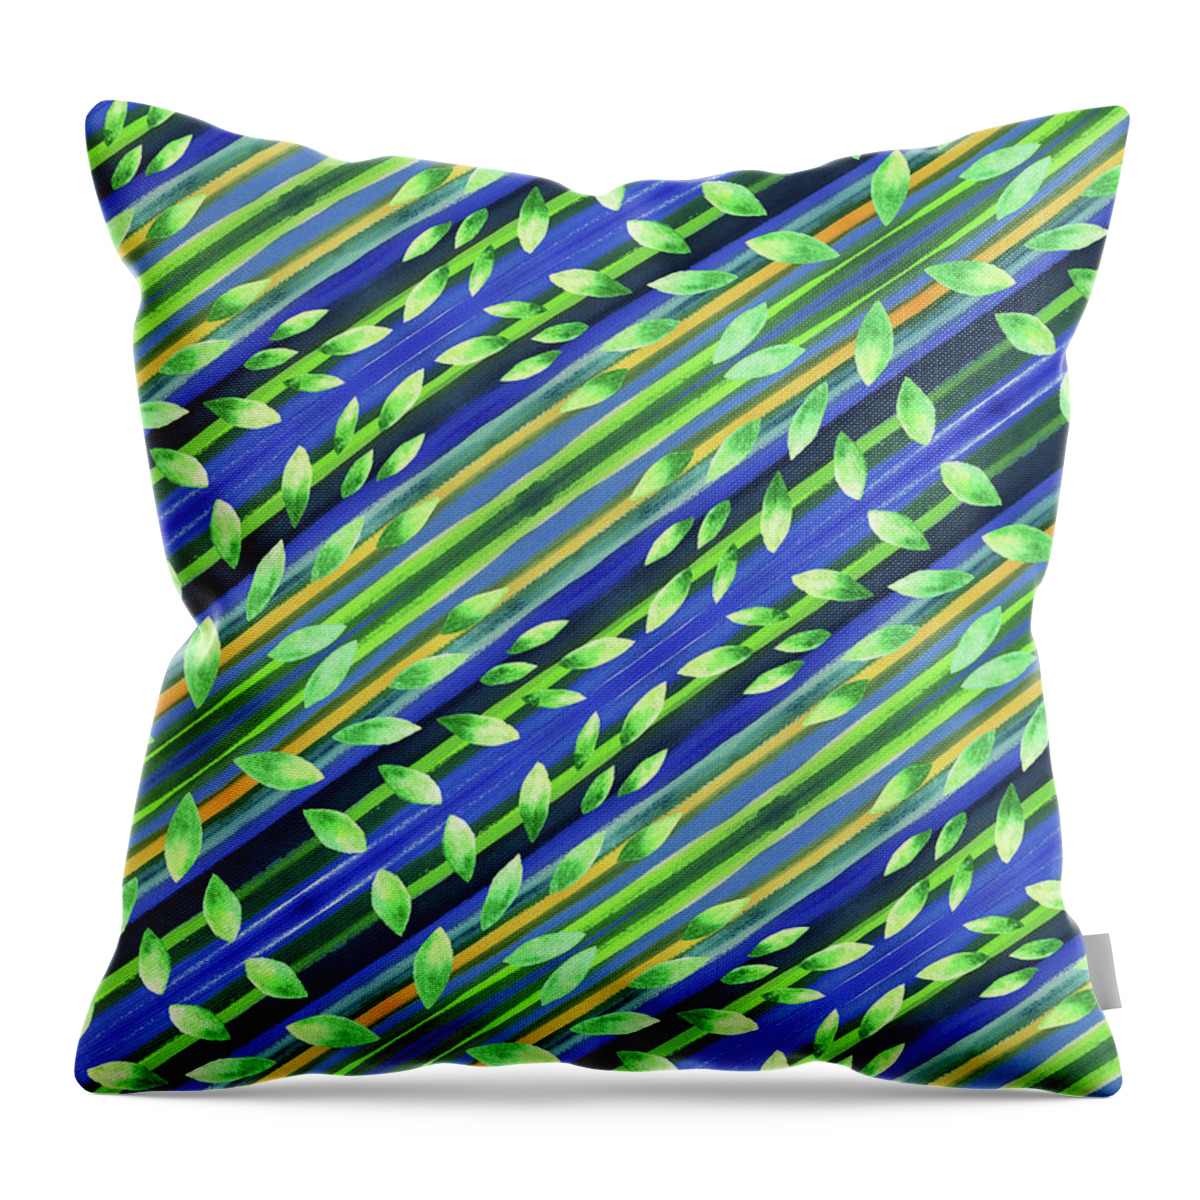 Green Throw Pillow featuring the painting Lines And Leaves Nature Pattern II by Irina Sztukowski